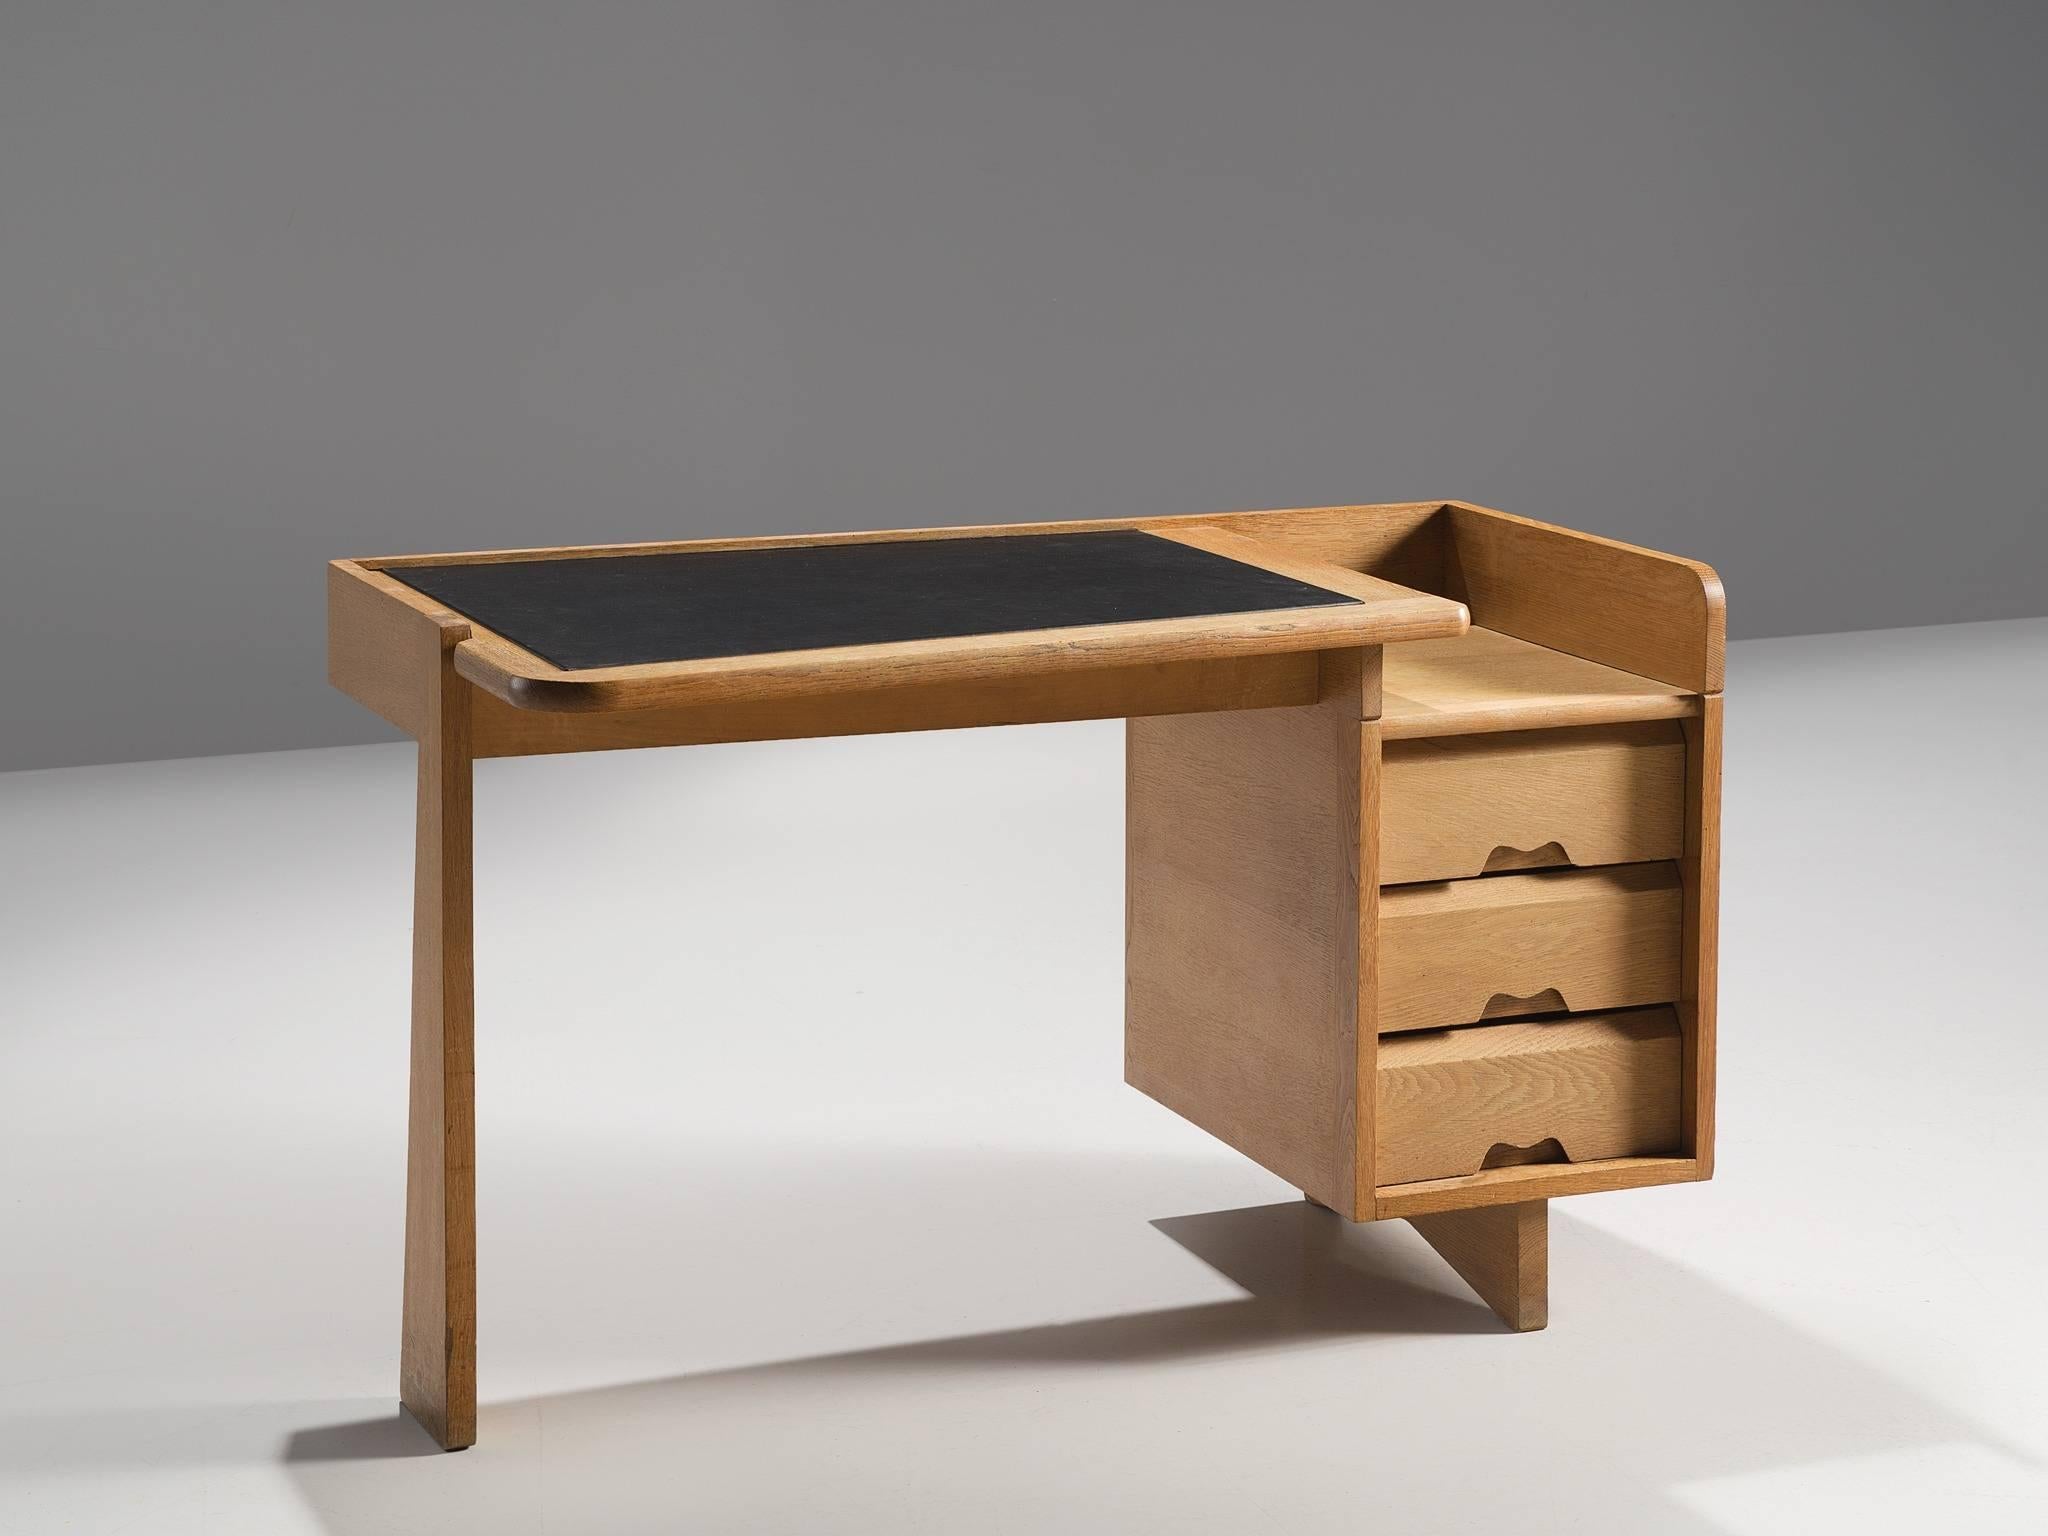 Guillerme et Chambron, desk, oak and leather, France, 1960s. 

This small desk is designed by the French designer duo Guillerme and Chambron. This writing desk holds the characteristic decorations and lines of this duo such as the decorative